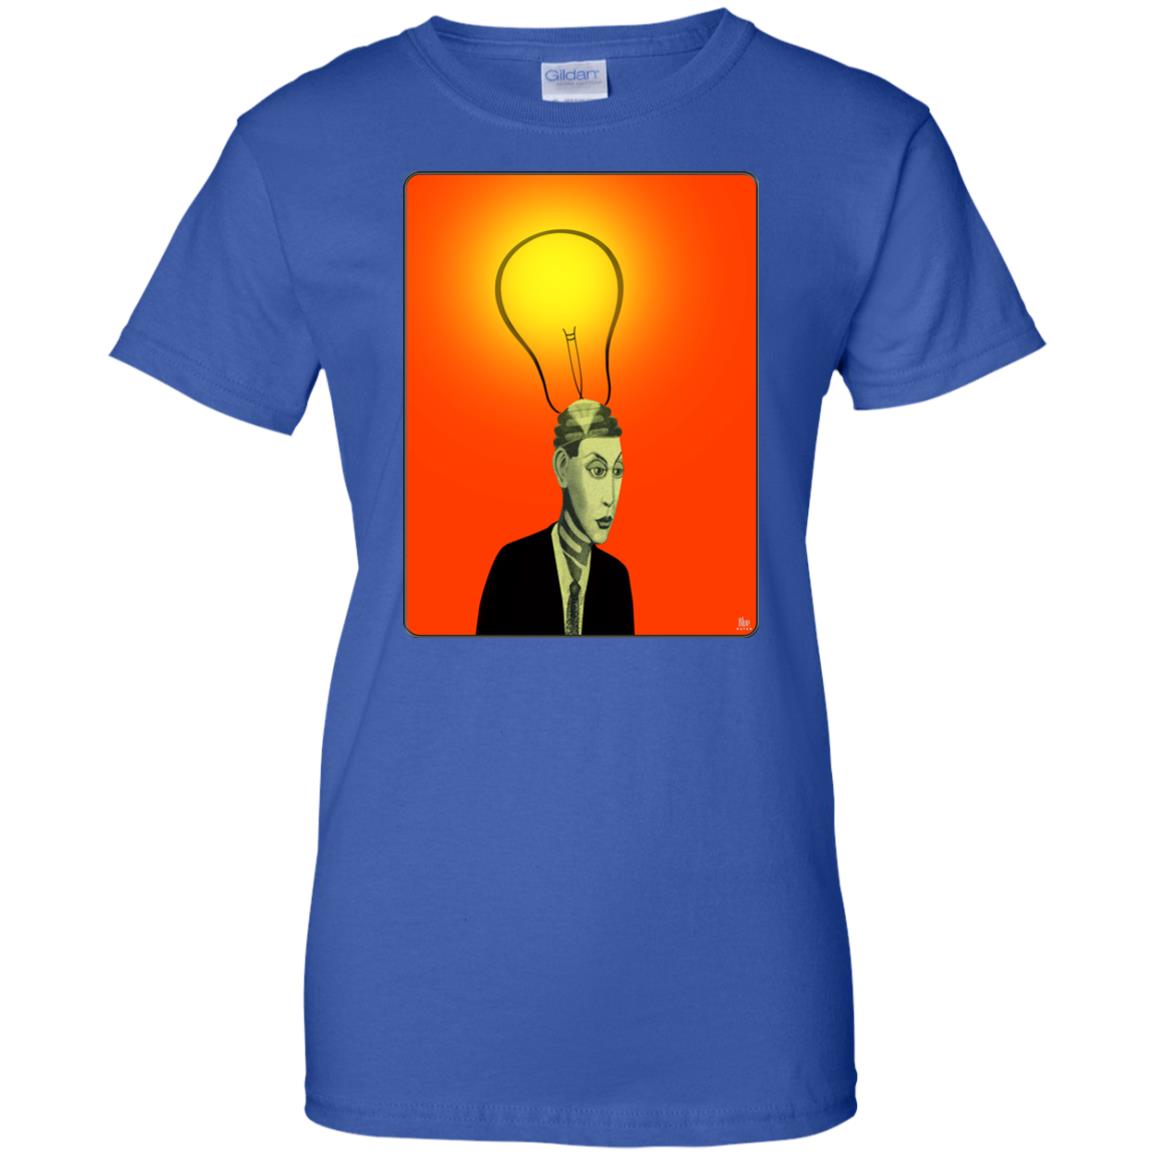 BRIGHT IDEA - Women's Relaxed Fit T-Shirt